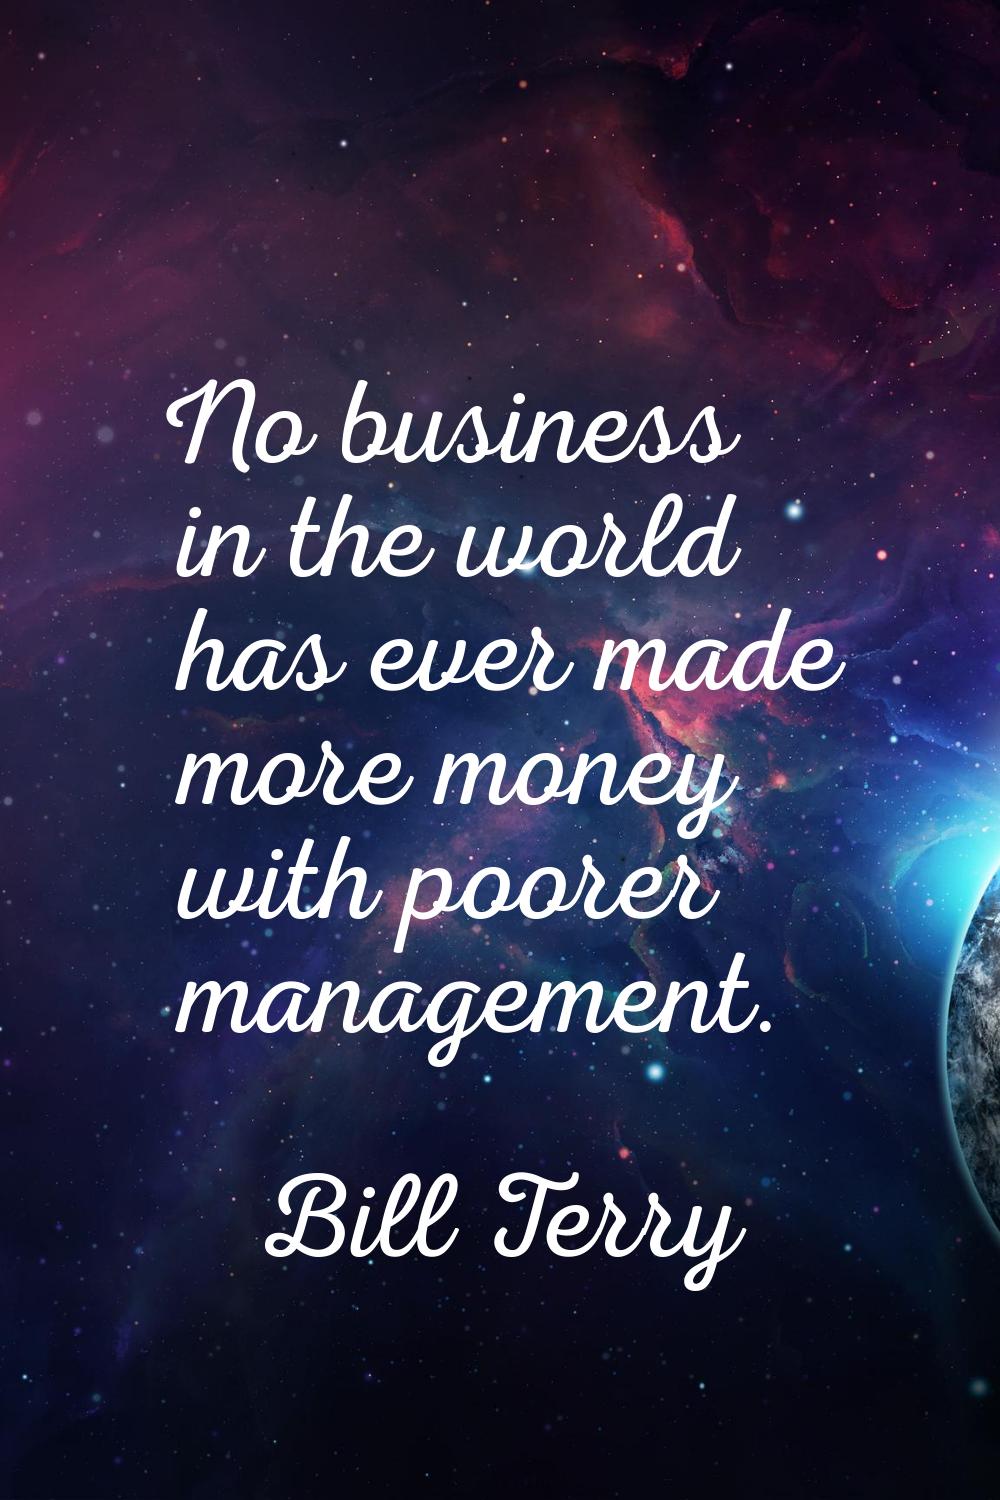 No business in the world has ever made more money with poorer management.